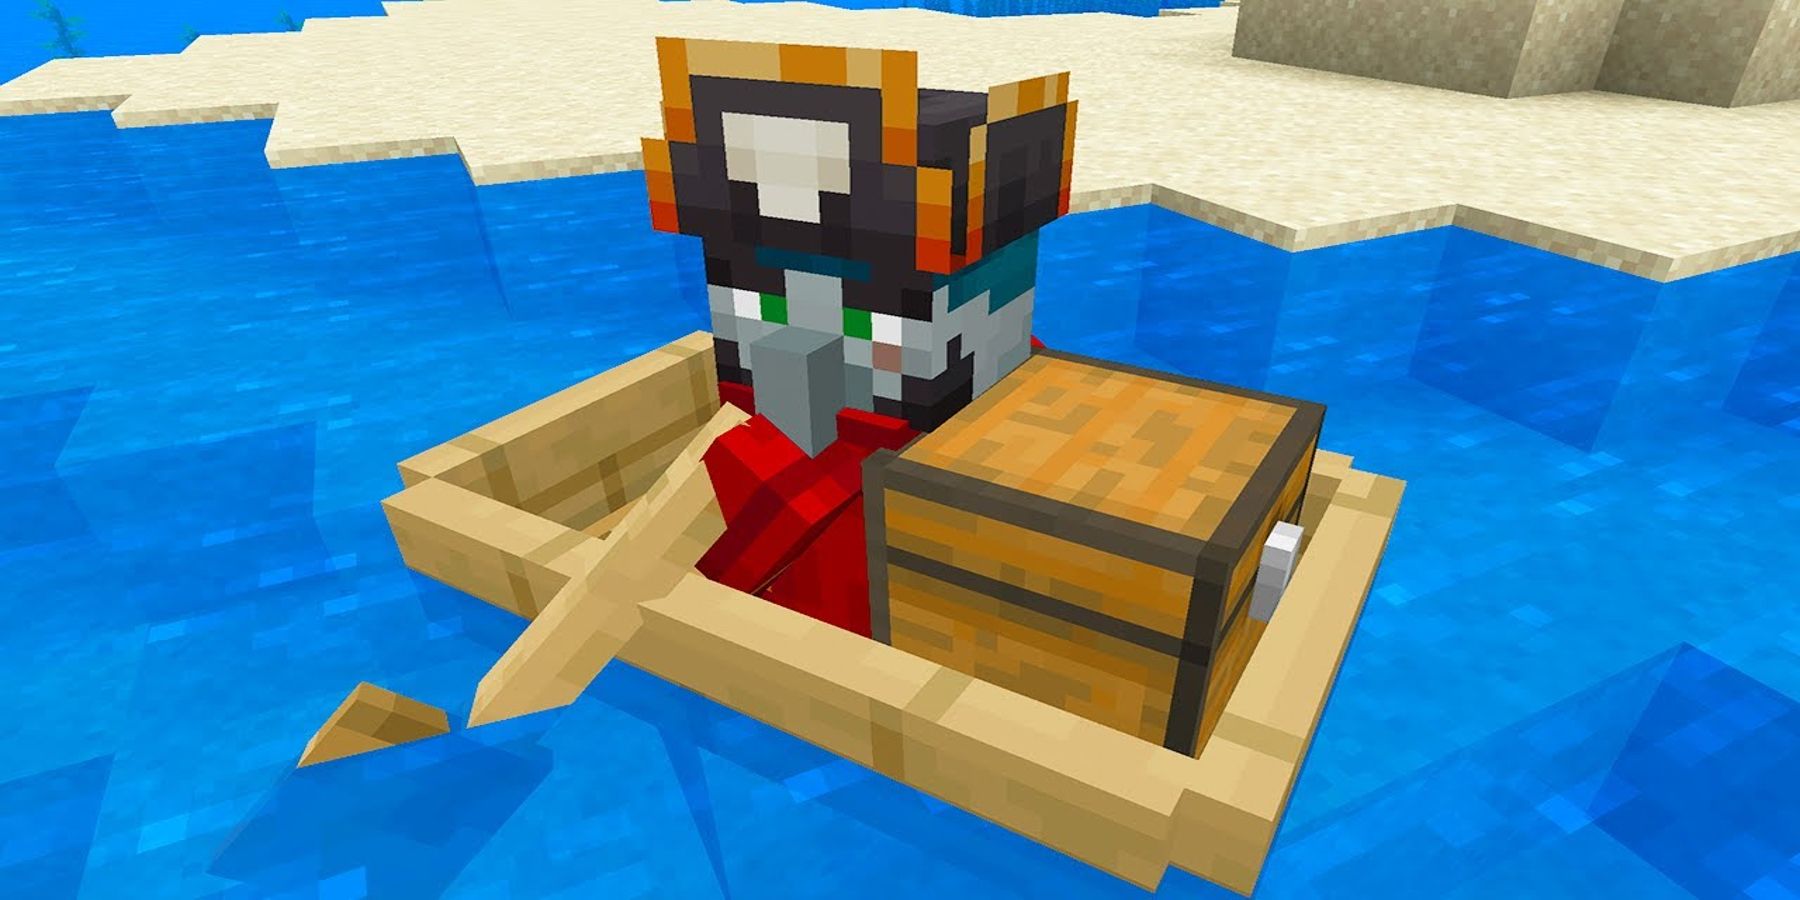 A mod for Minecraft that introduces Pirates